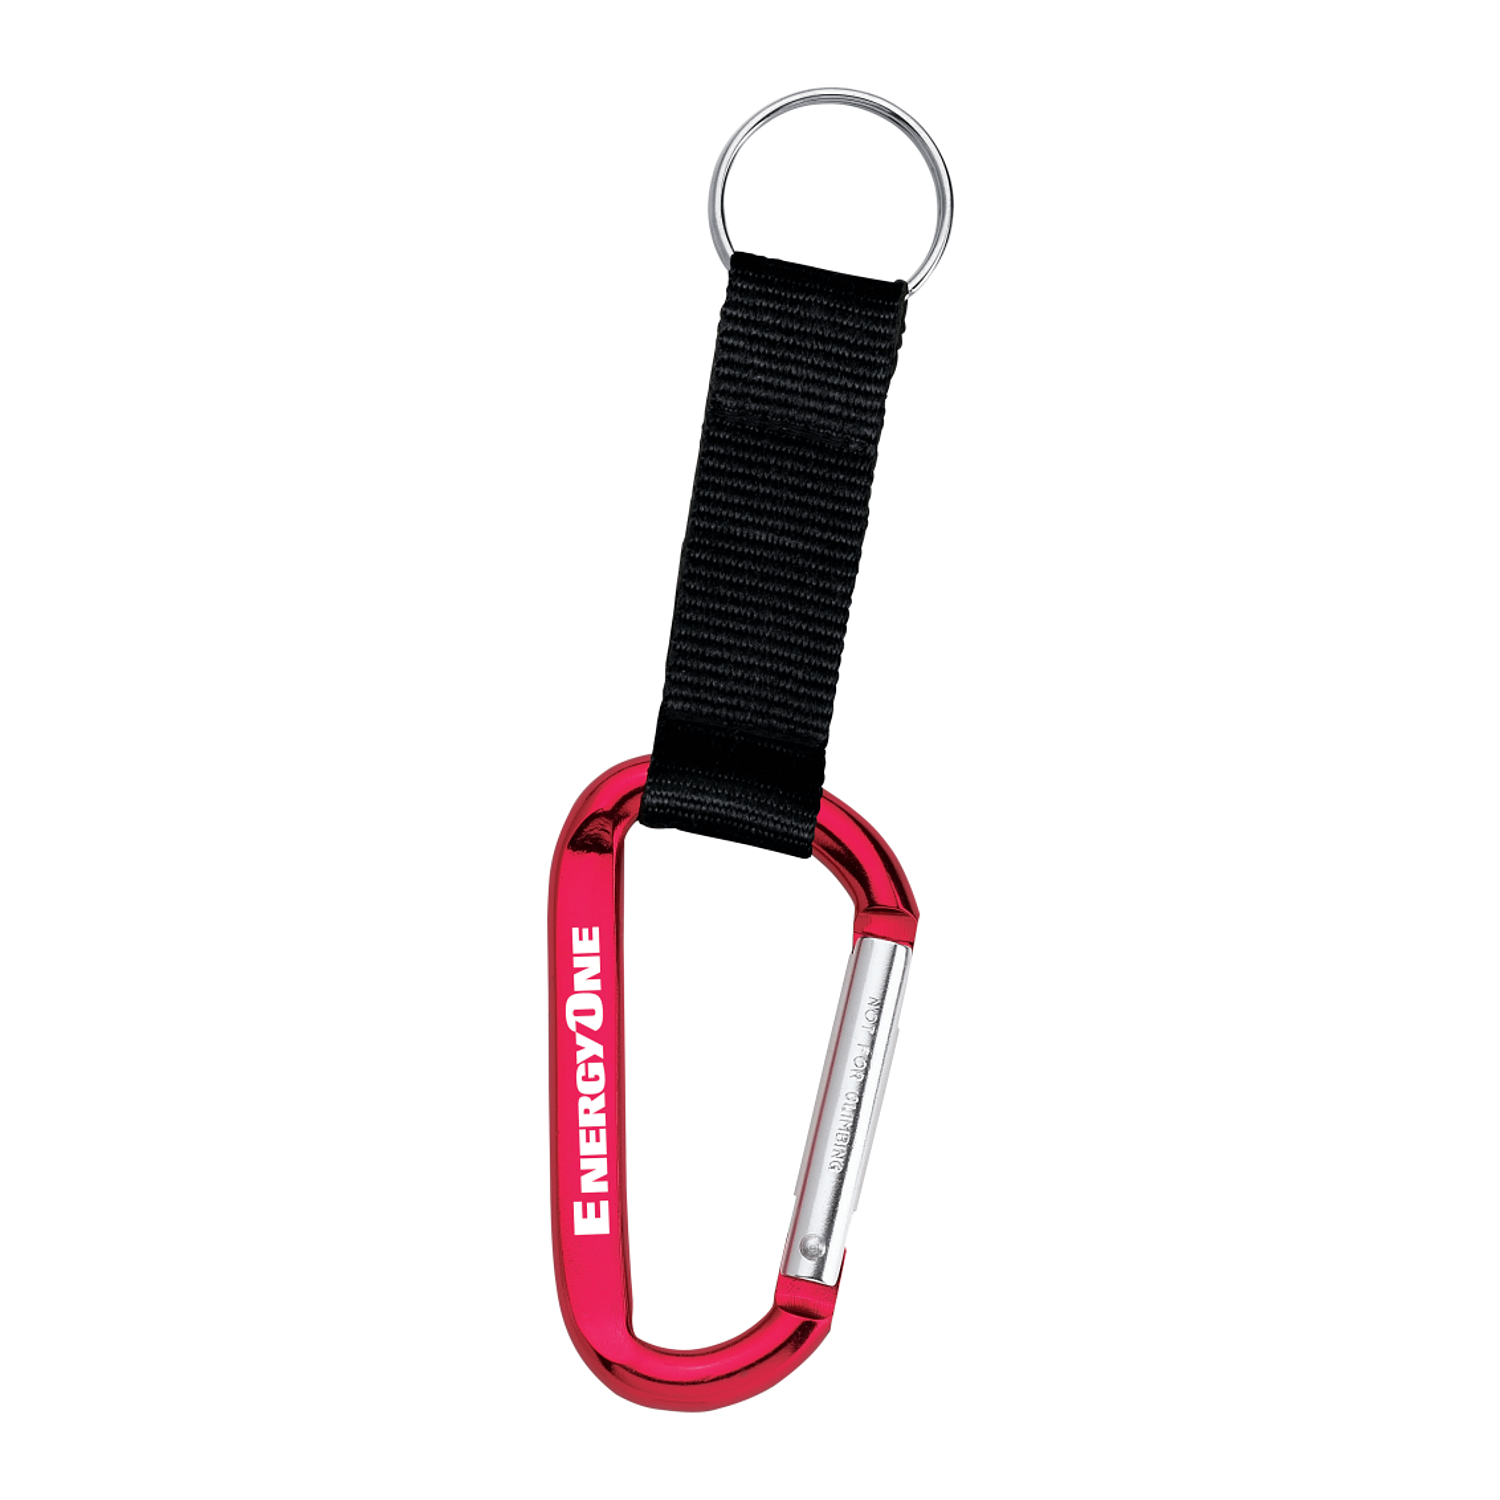 US Fast Print 8 mm Carabiner Key Ring w/Strap - Bulk Custom Personalized Promotional Products